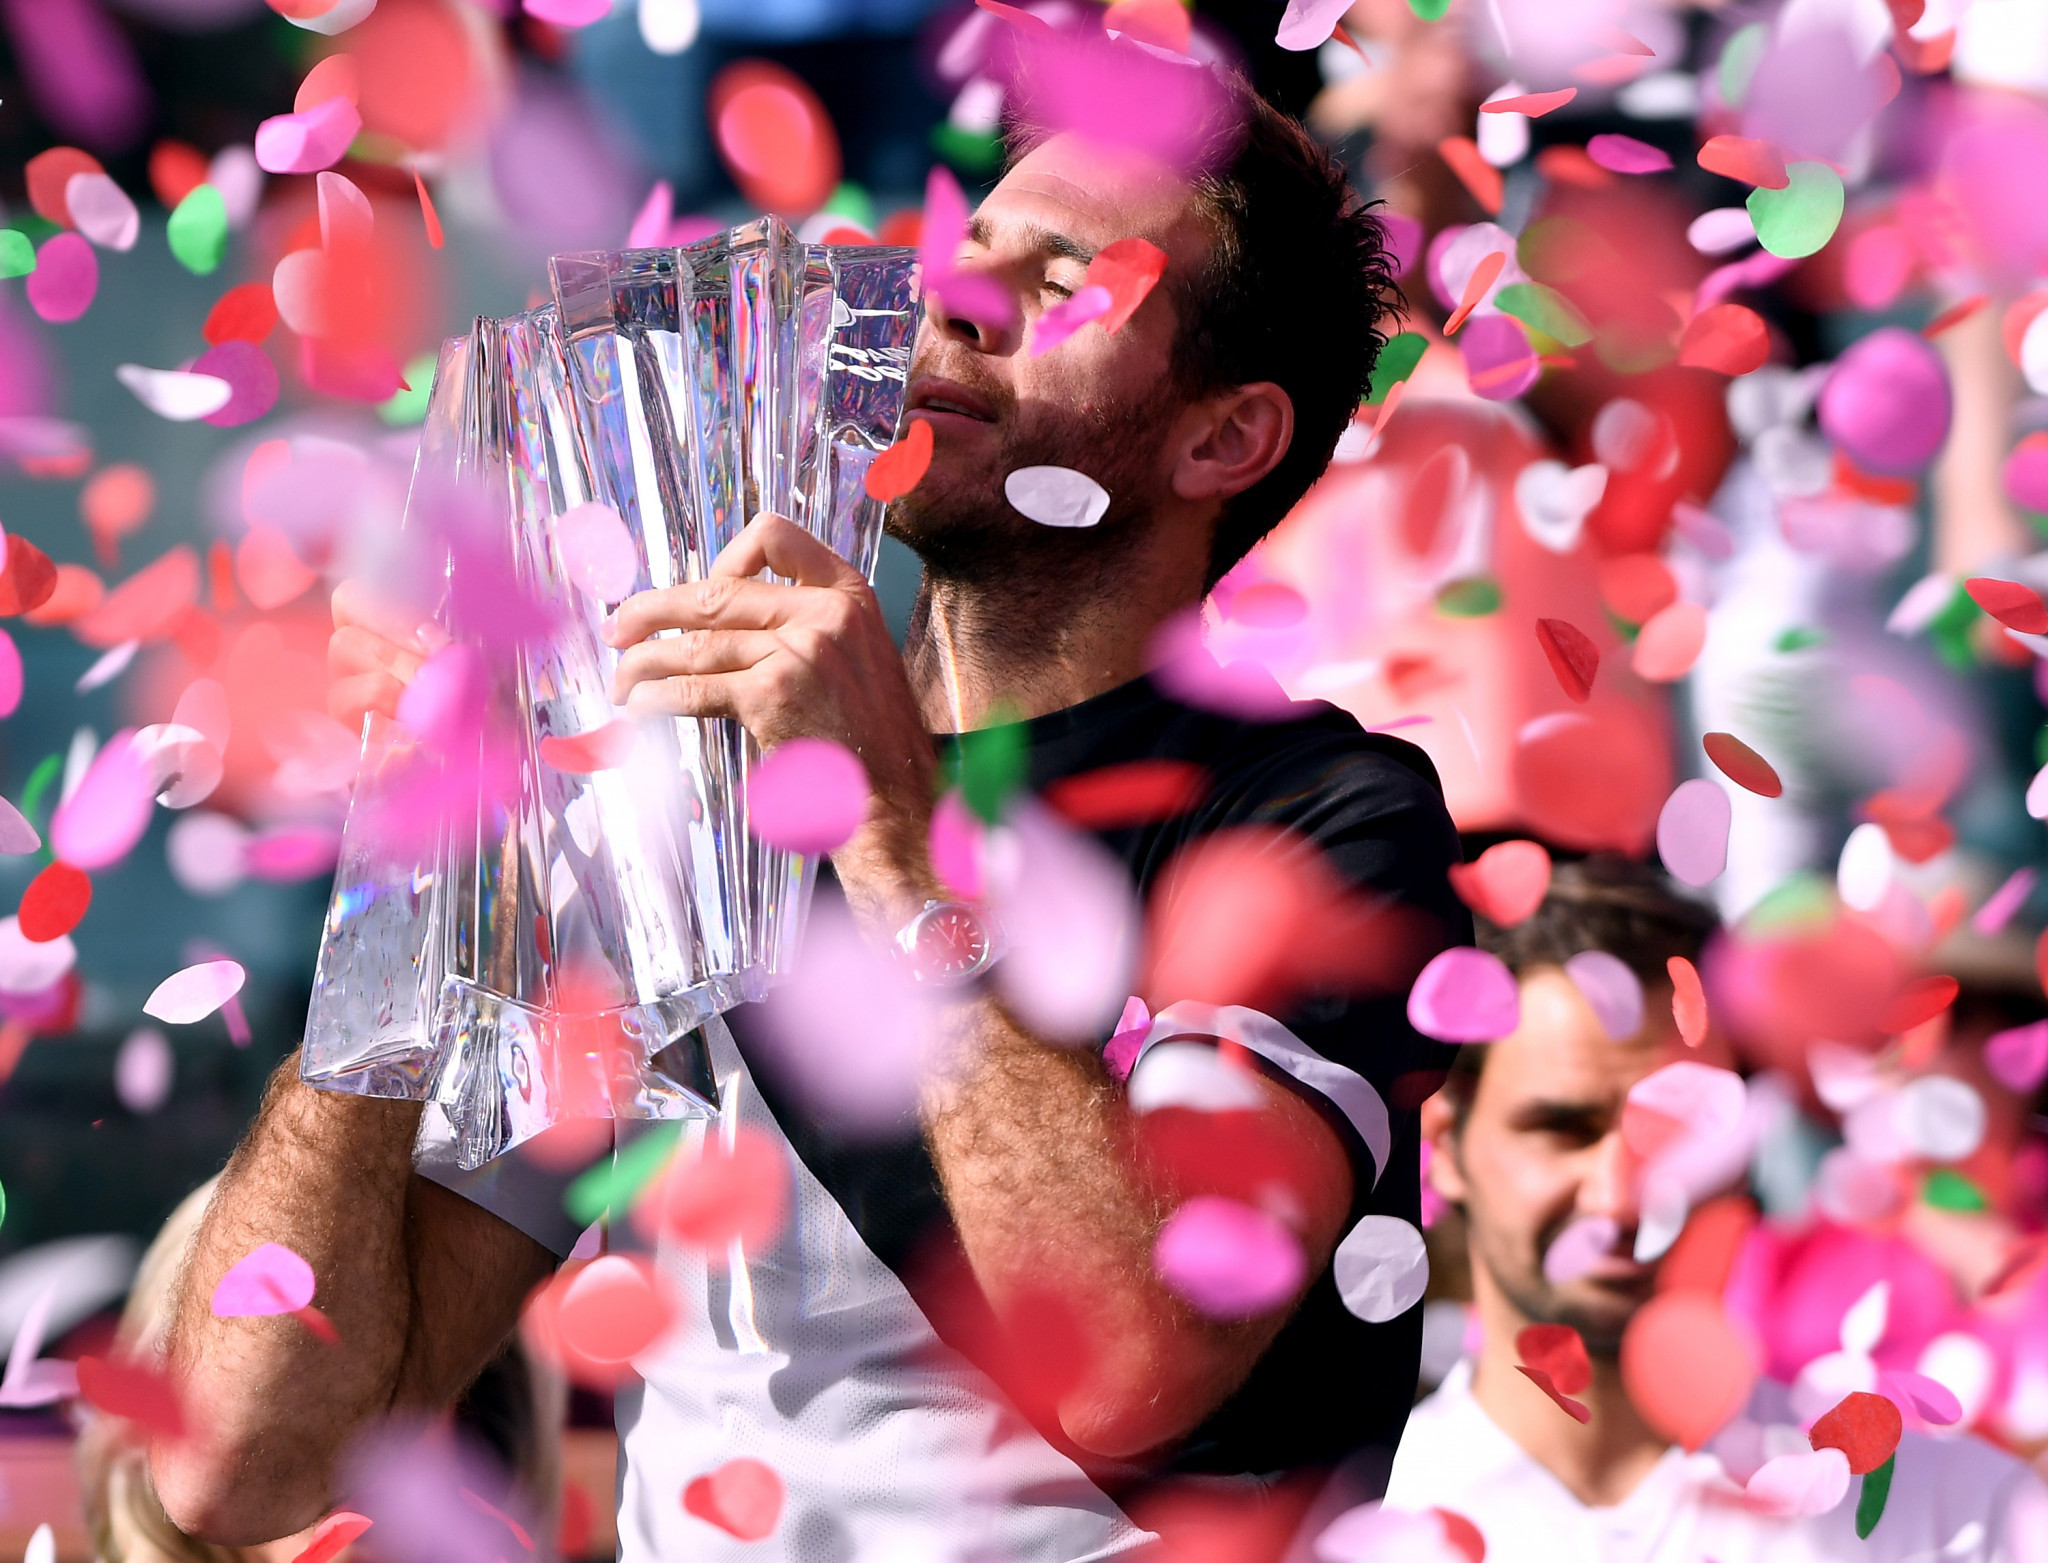 Del Potro ends Federer's run to claim shock Indian Wells title as unseeded Osaka wins women's event